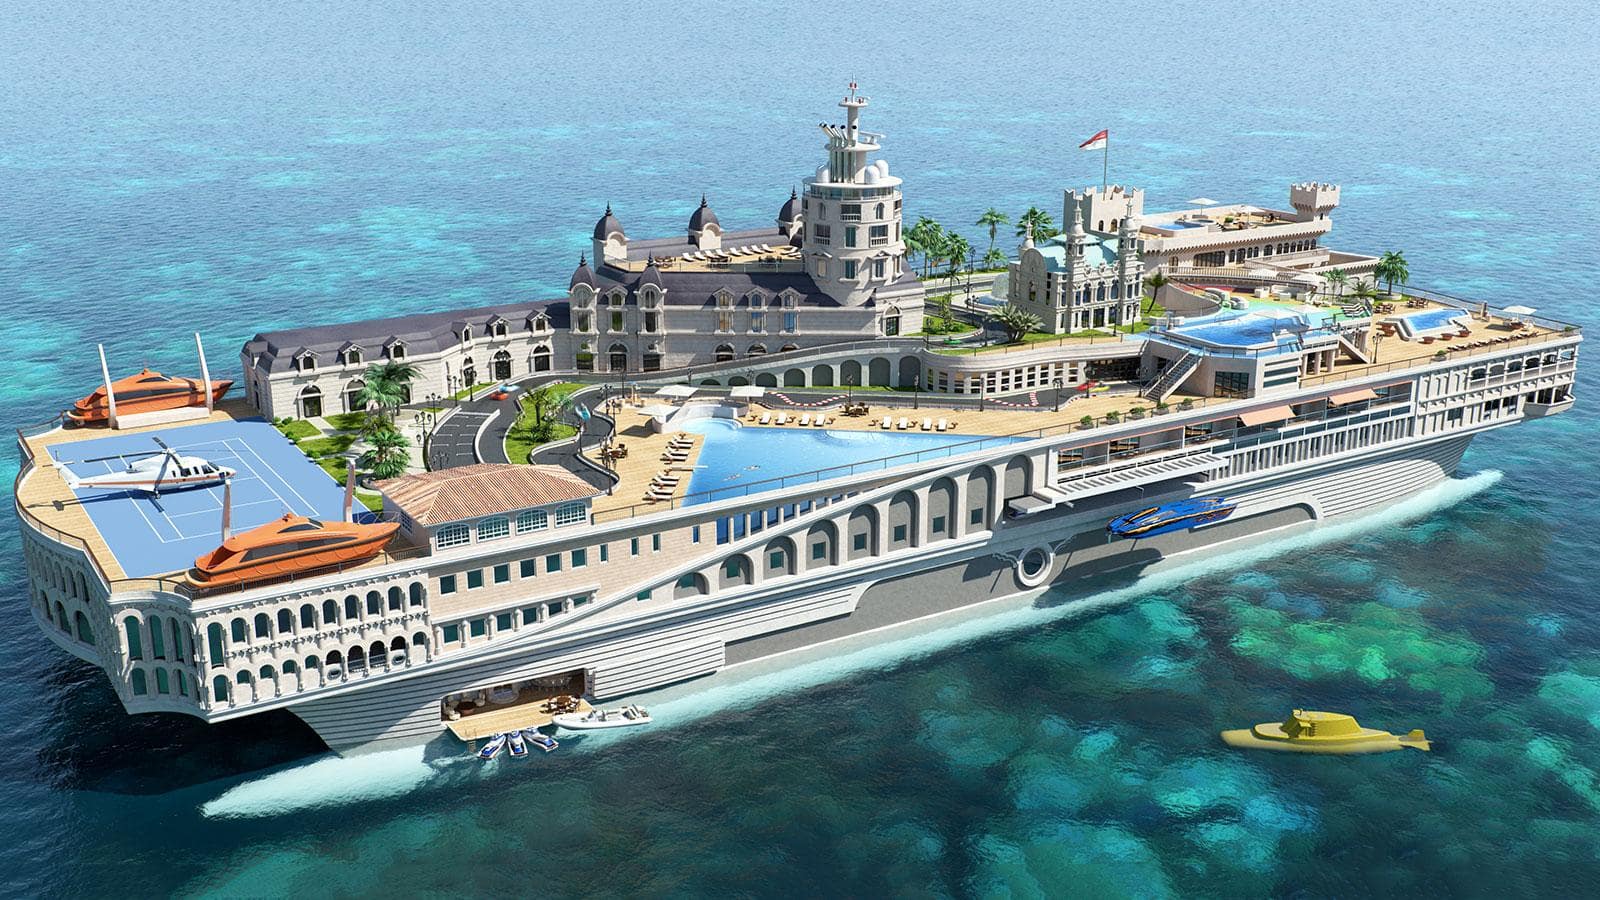 The superyachts of the future blog by SCS Yachting